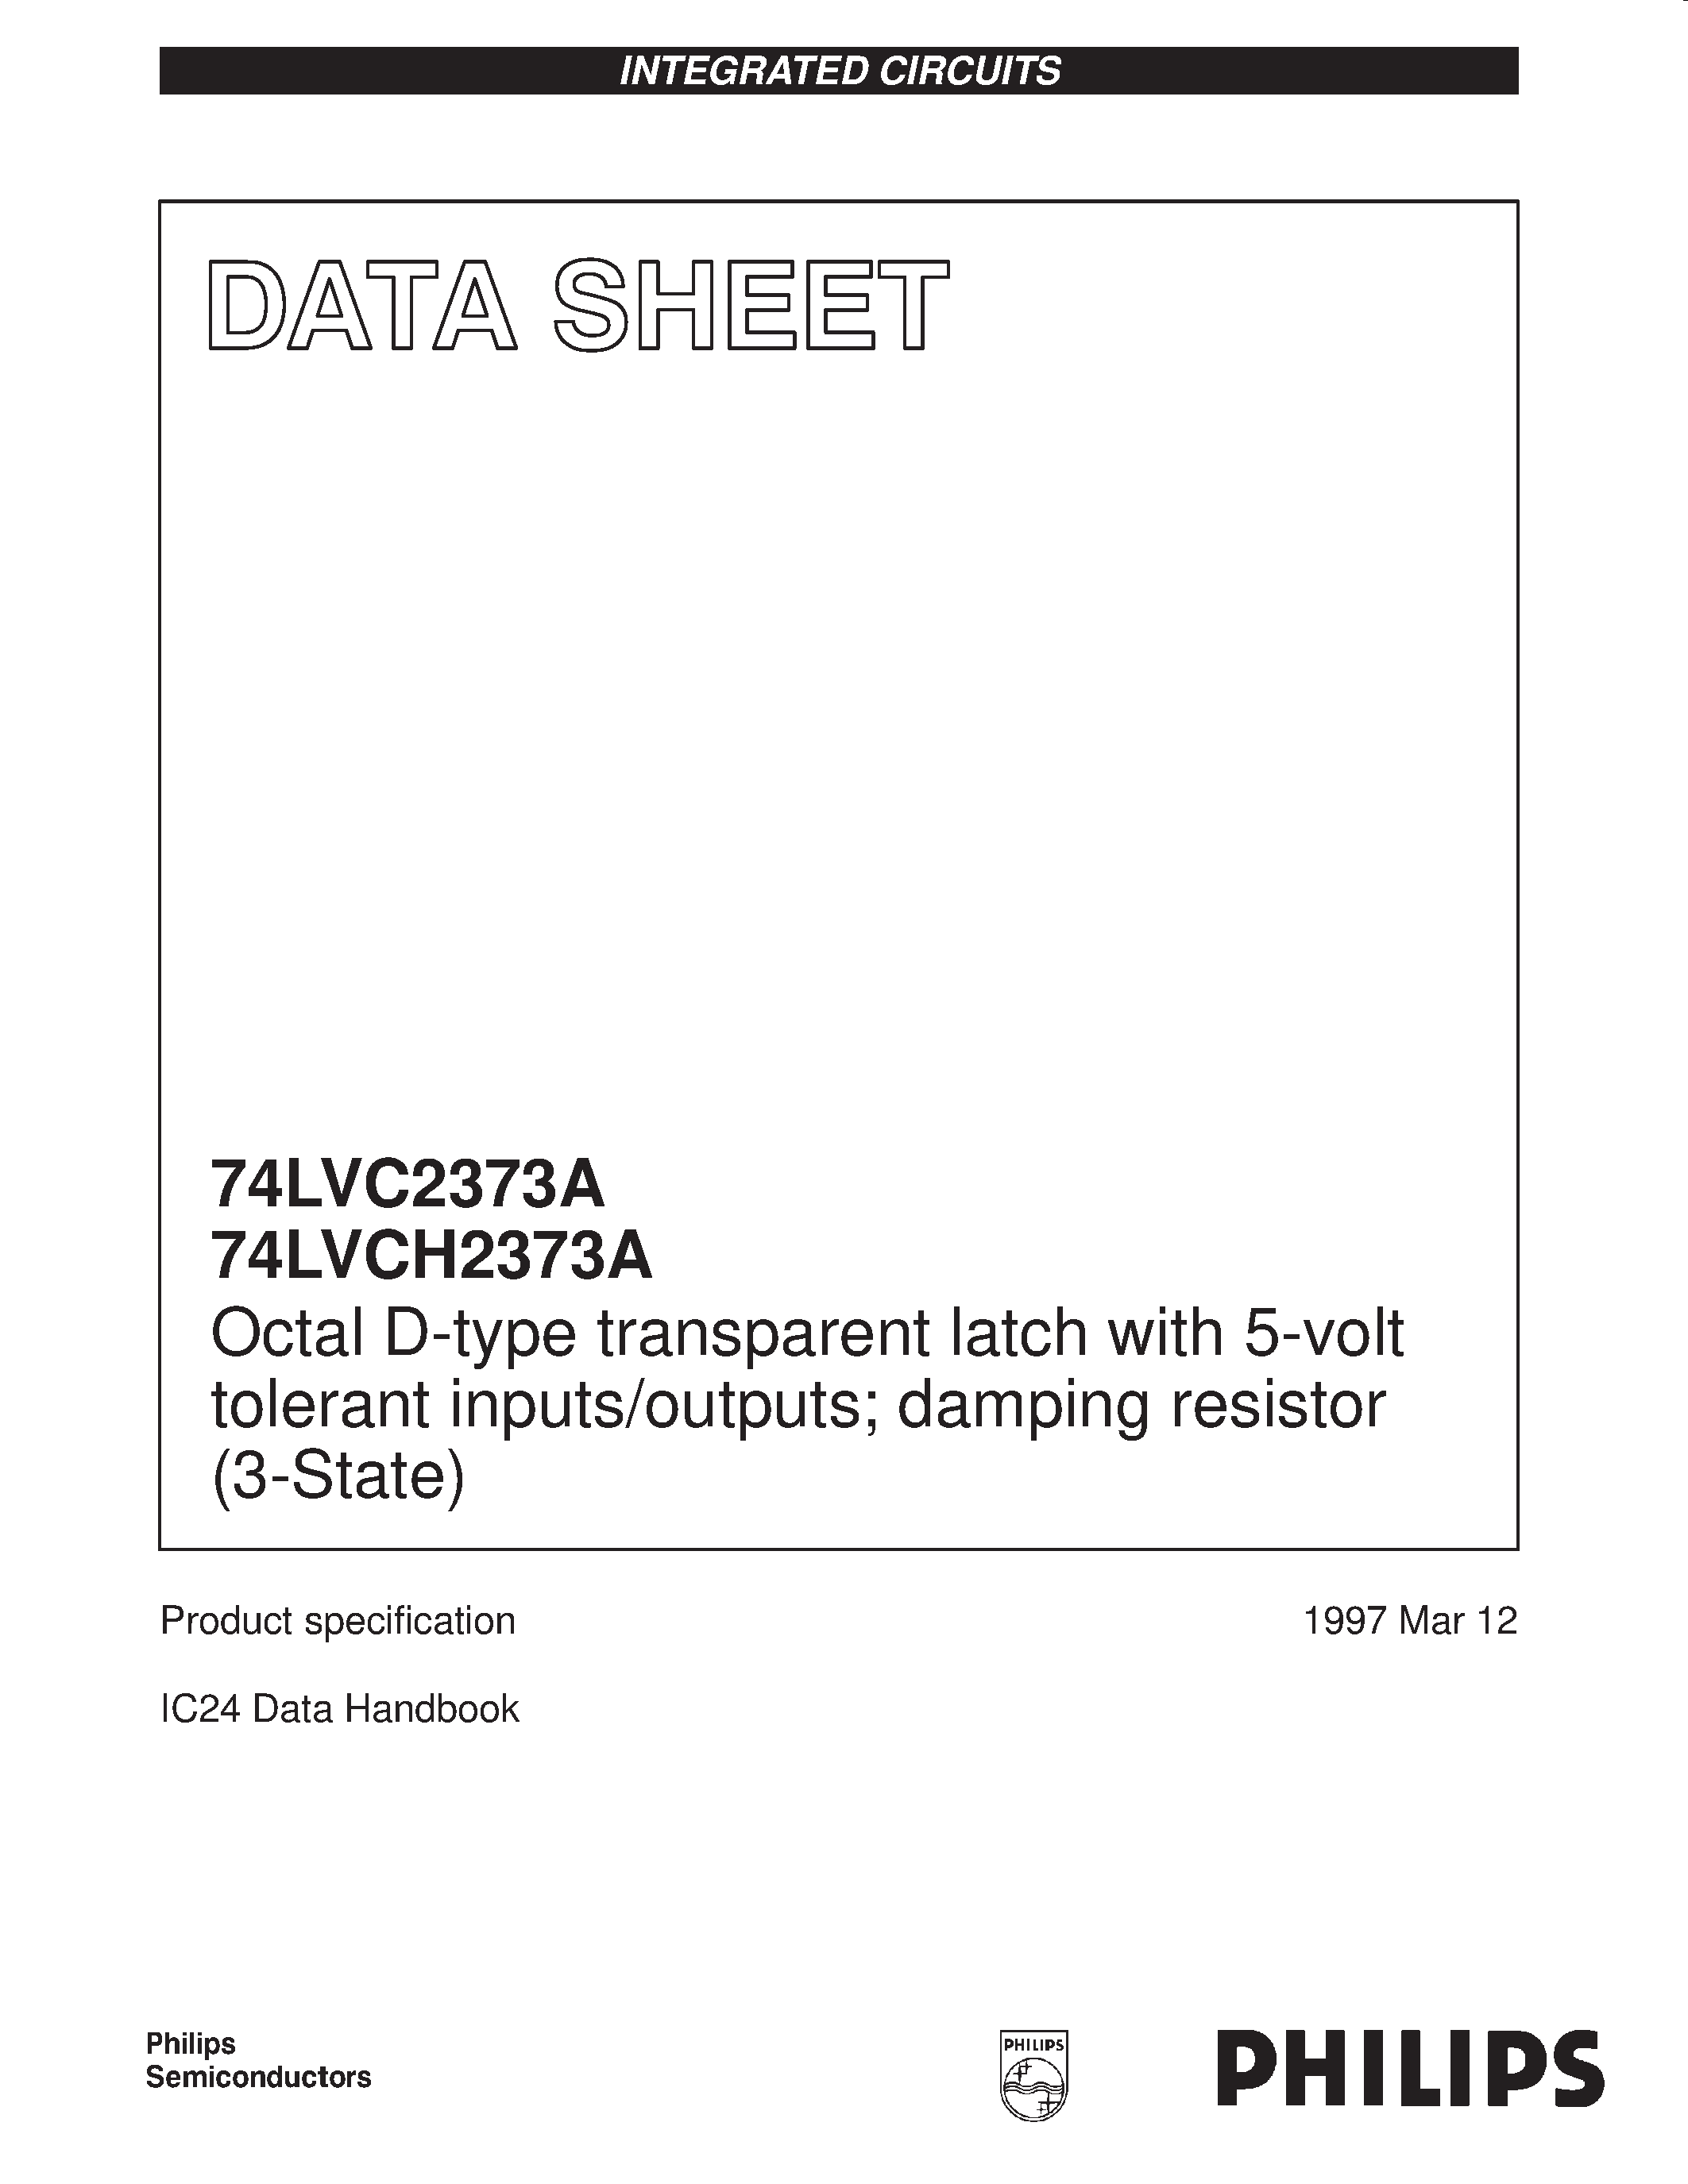 Datasheet VCH2373APWDH - Octal D-type transparent latch with 5-volt tolerant inputs/outputs; damping resistor 3-State page 1